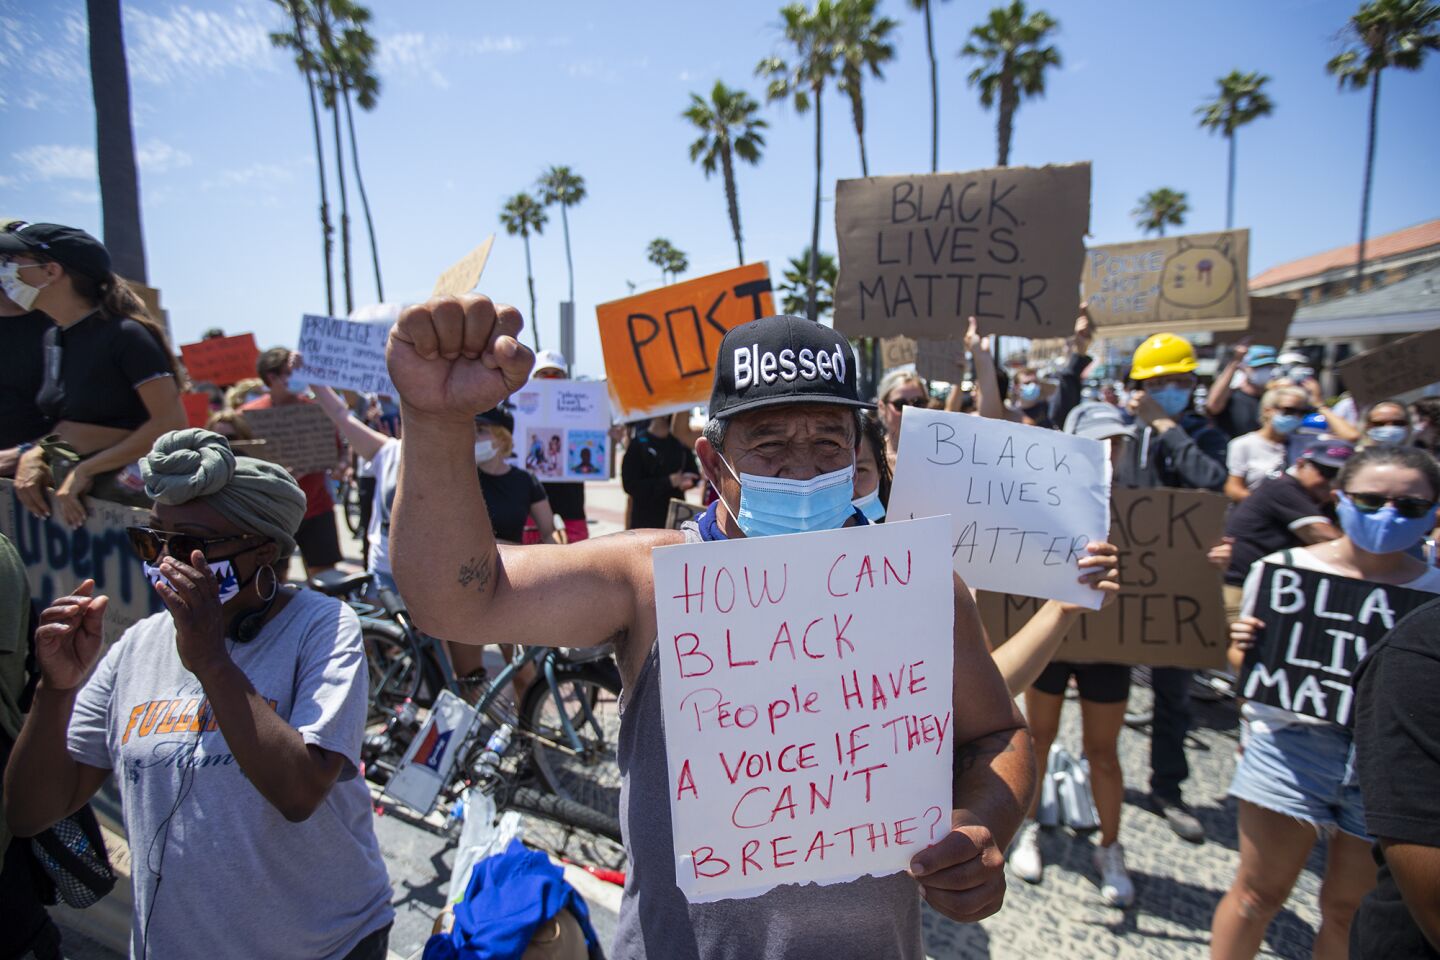 Demonstrators protesting George Floyd's death and supporting the Black Lives Matter movement participate in a peaceful demonstration near the Newport Beach Pier on Wednesday.